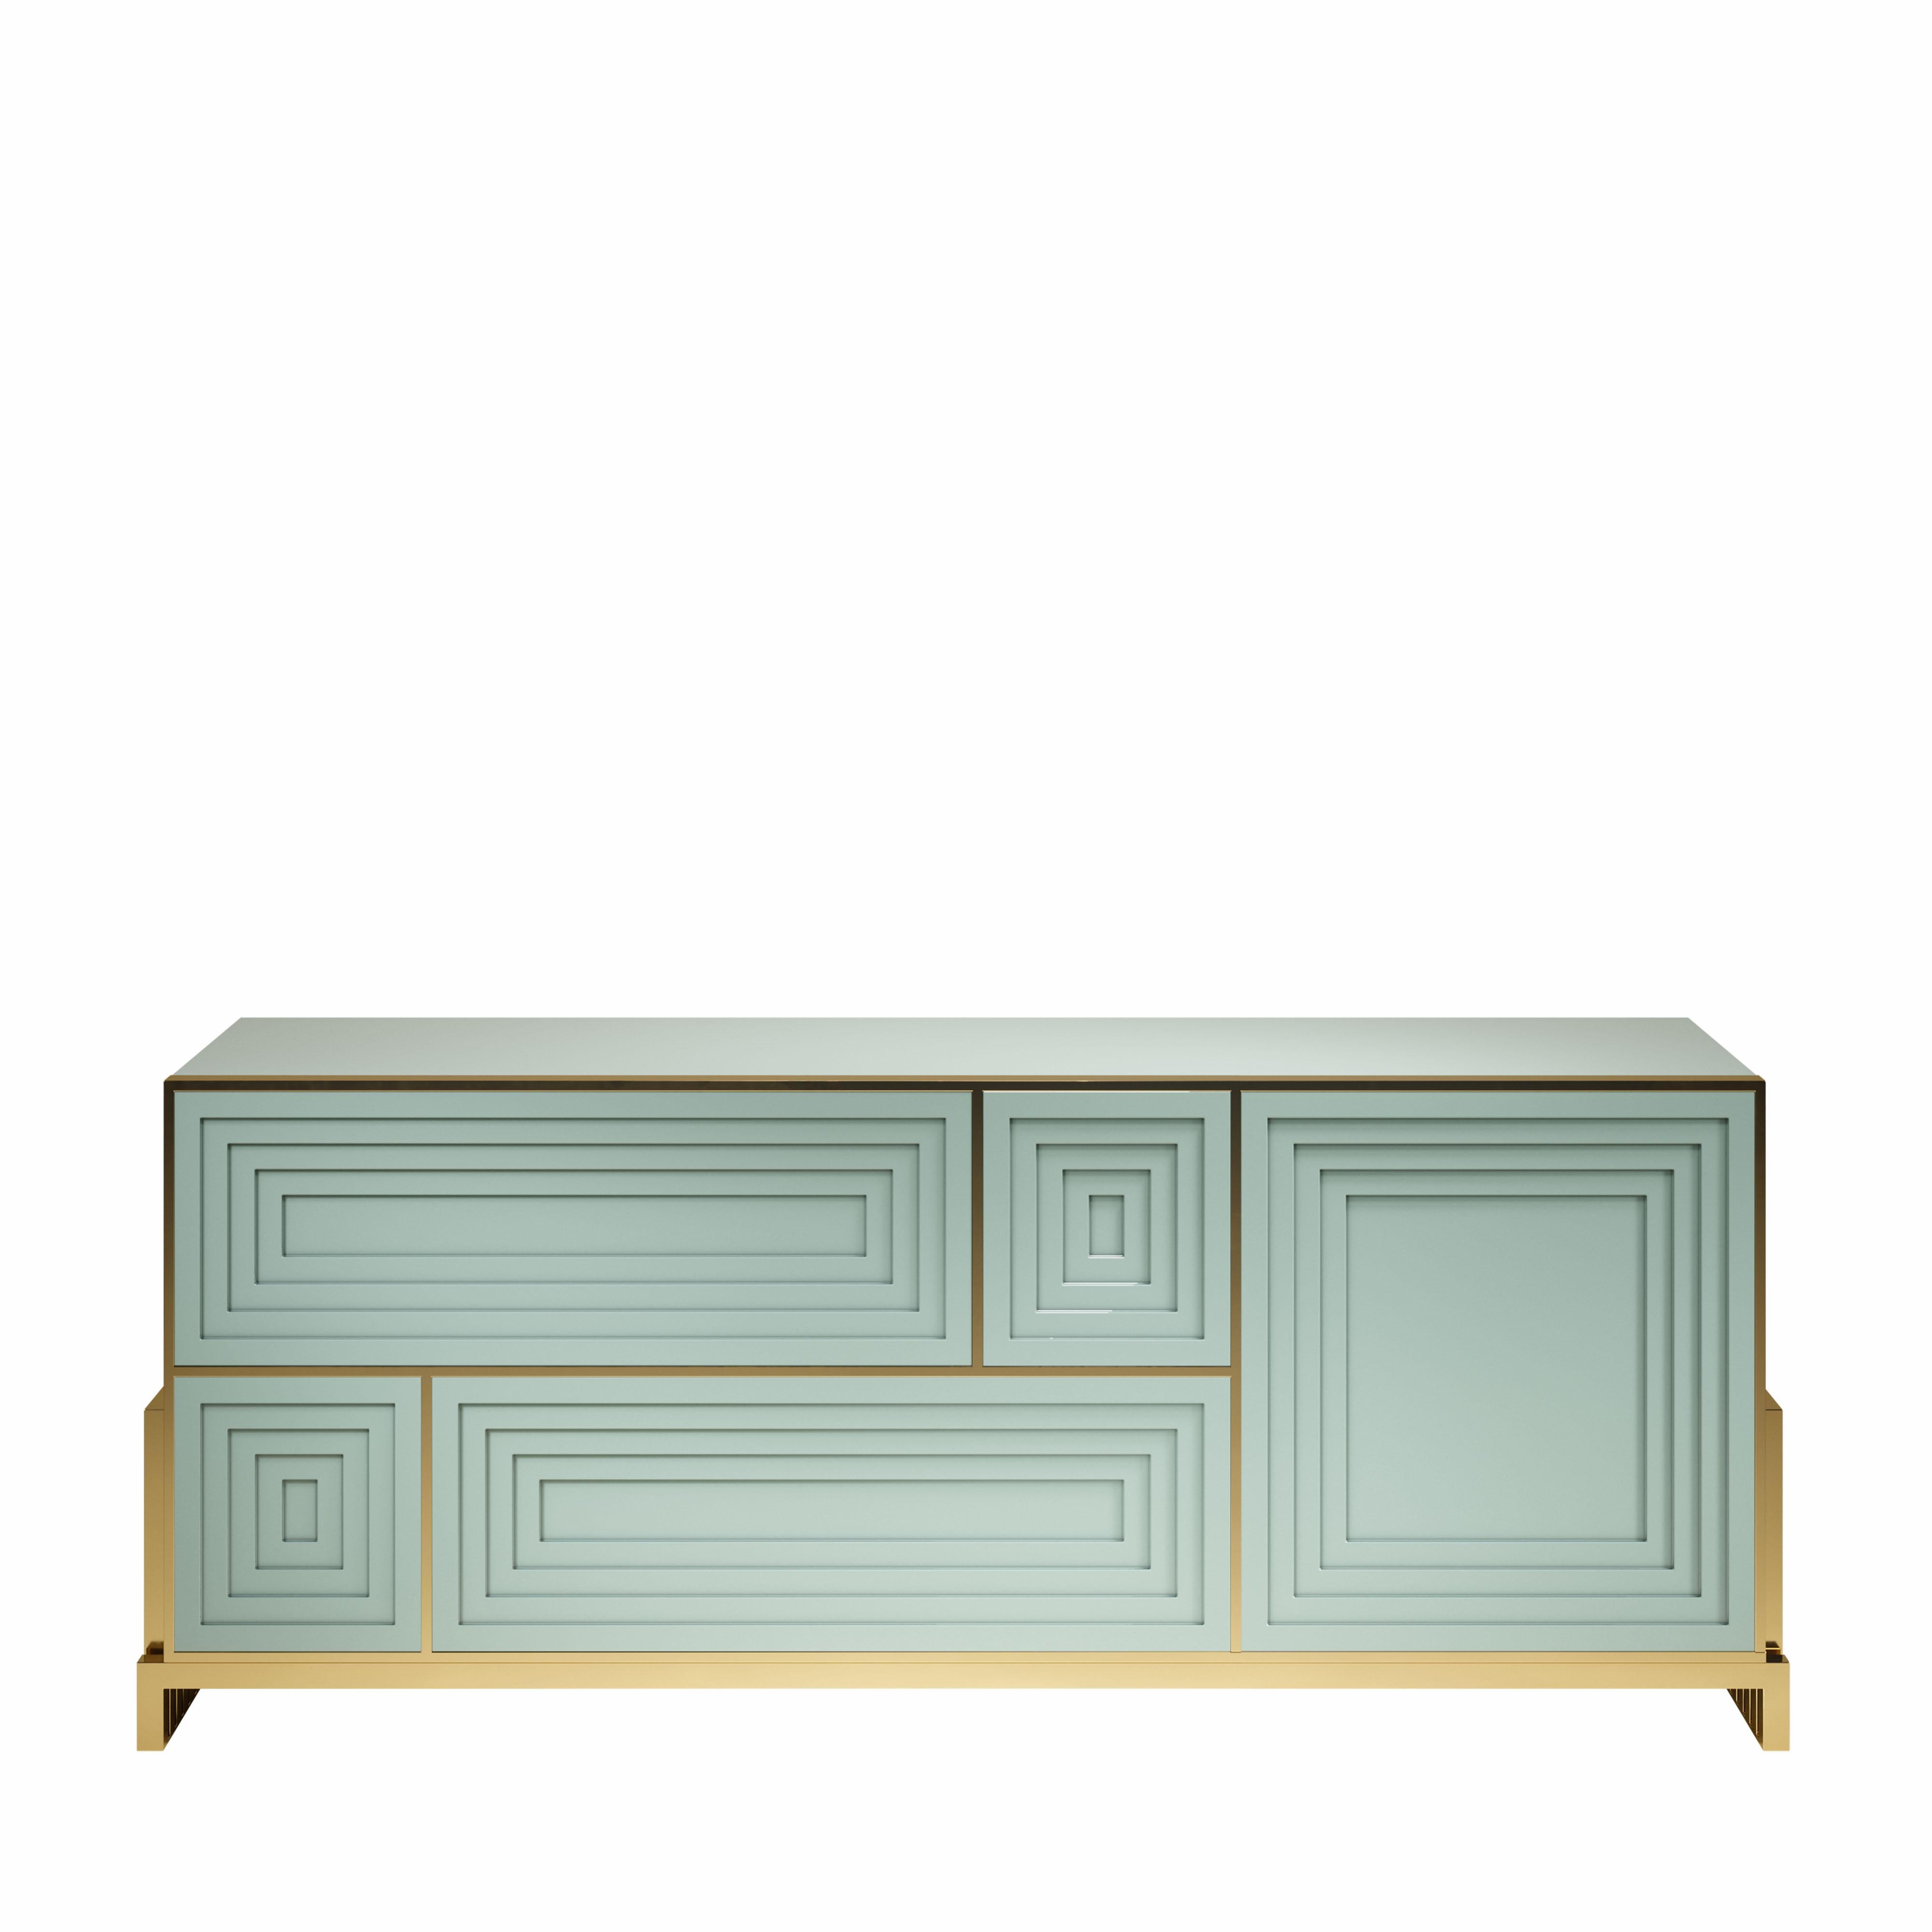 Contemporary 21st Century Venezia Sideboard Lacquered Wood Brass by Malabar For Sale